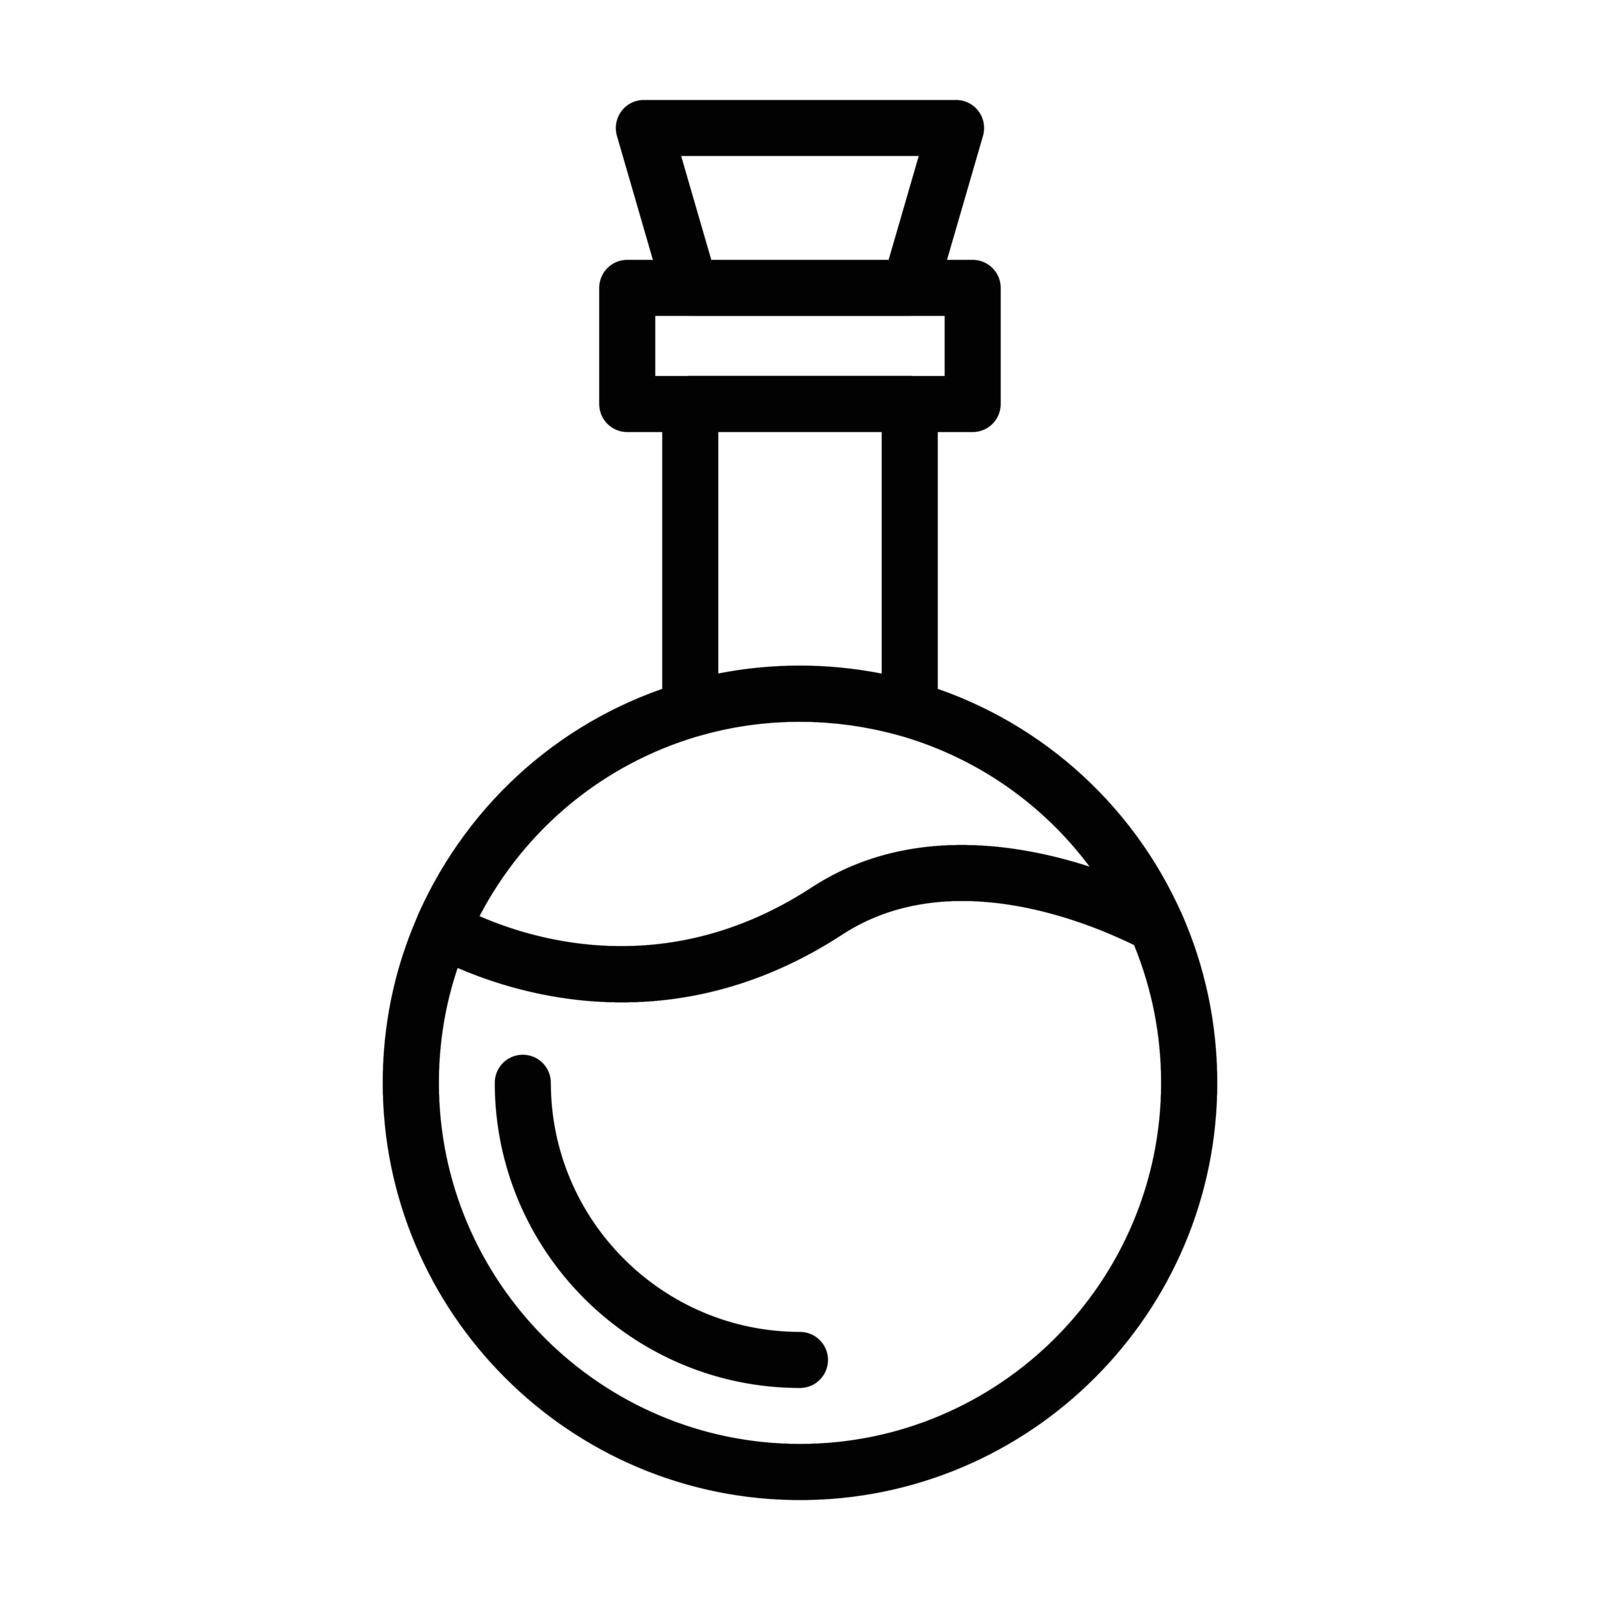 bottle Vector illustration on a transparent background. Premium quality symbols. Stroke vector icon for concept and graphic design